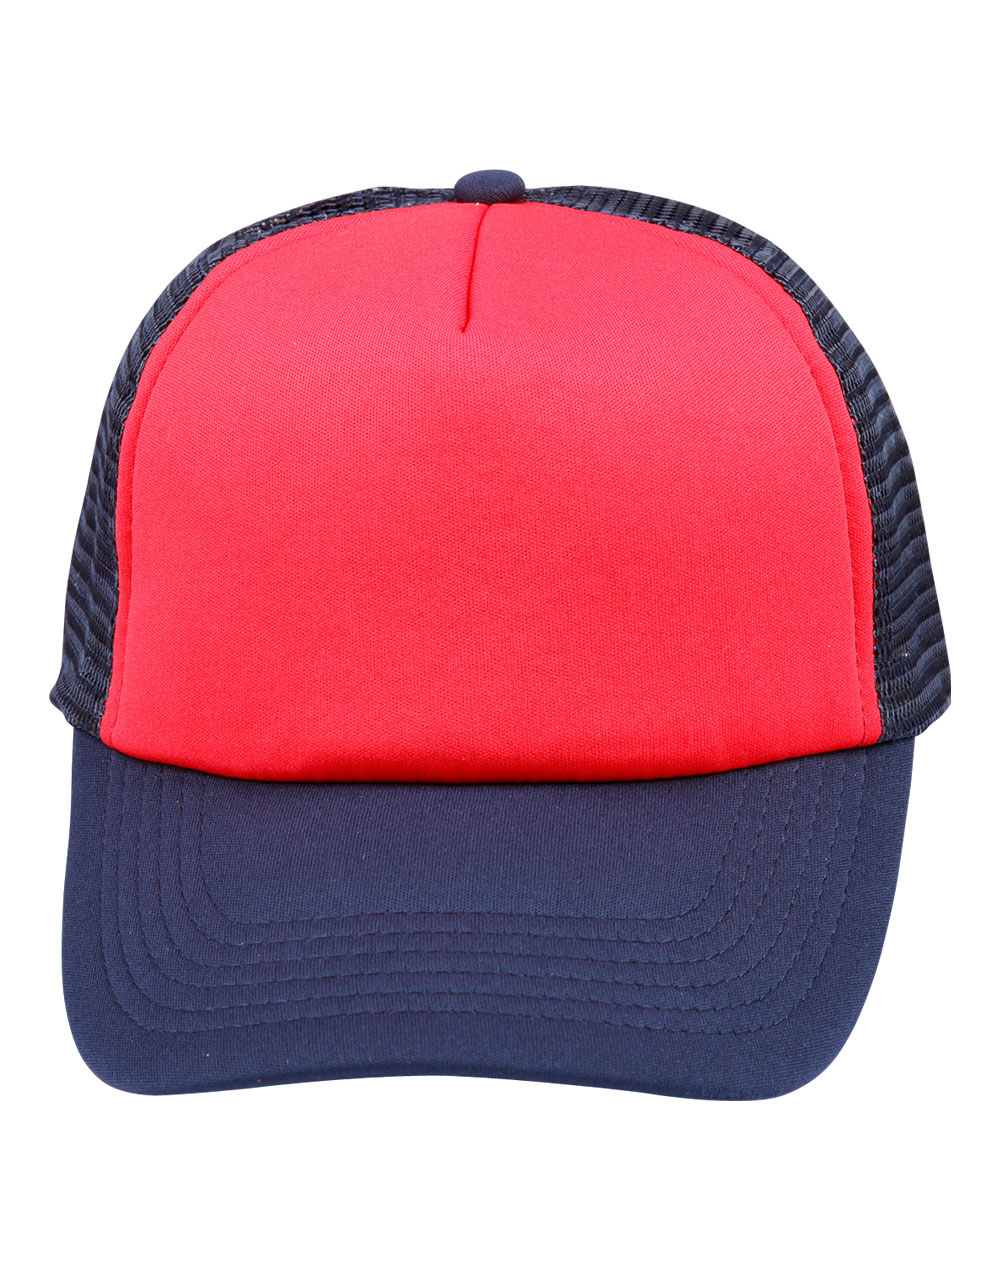 trucker red and navy think.jpg